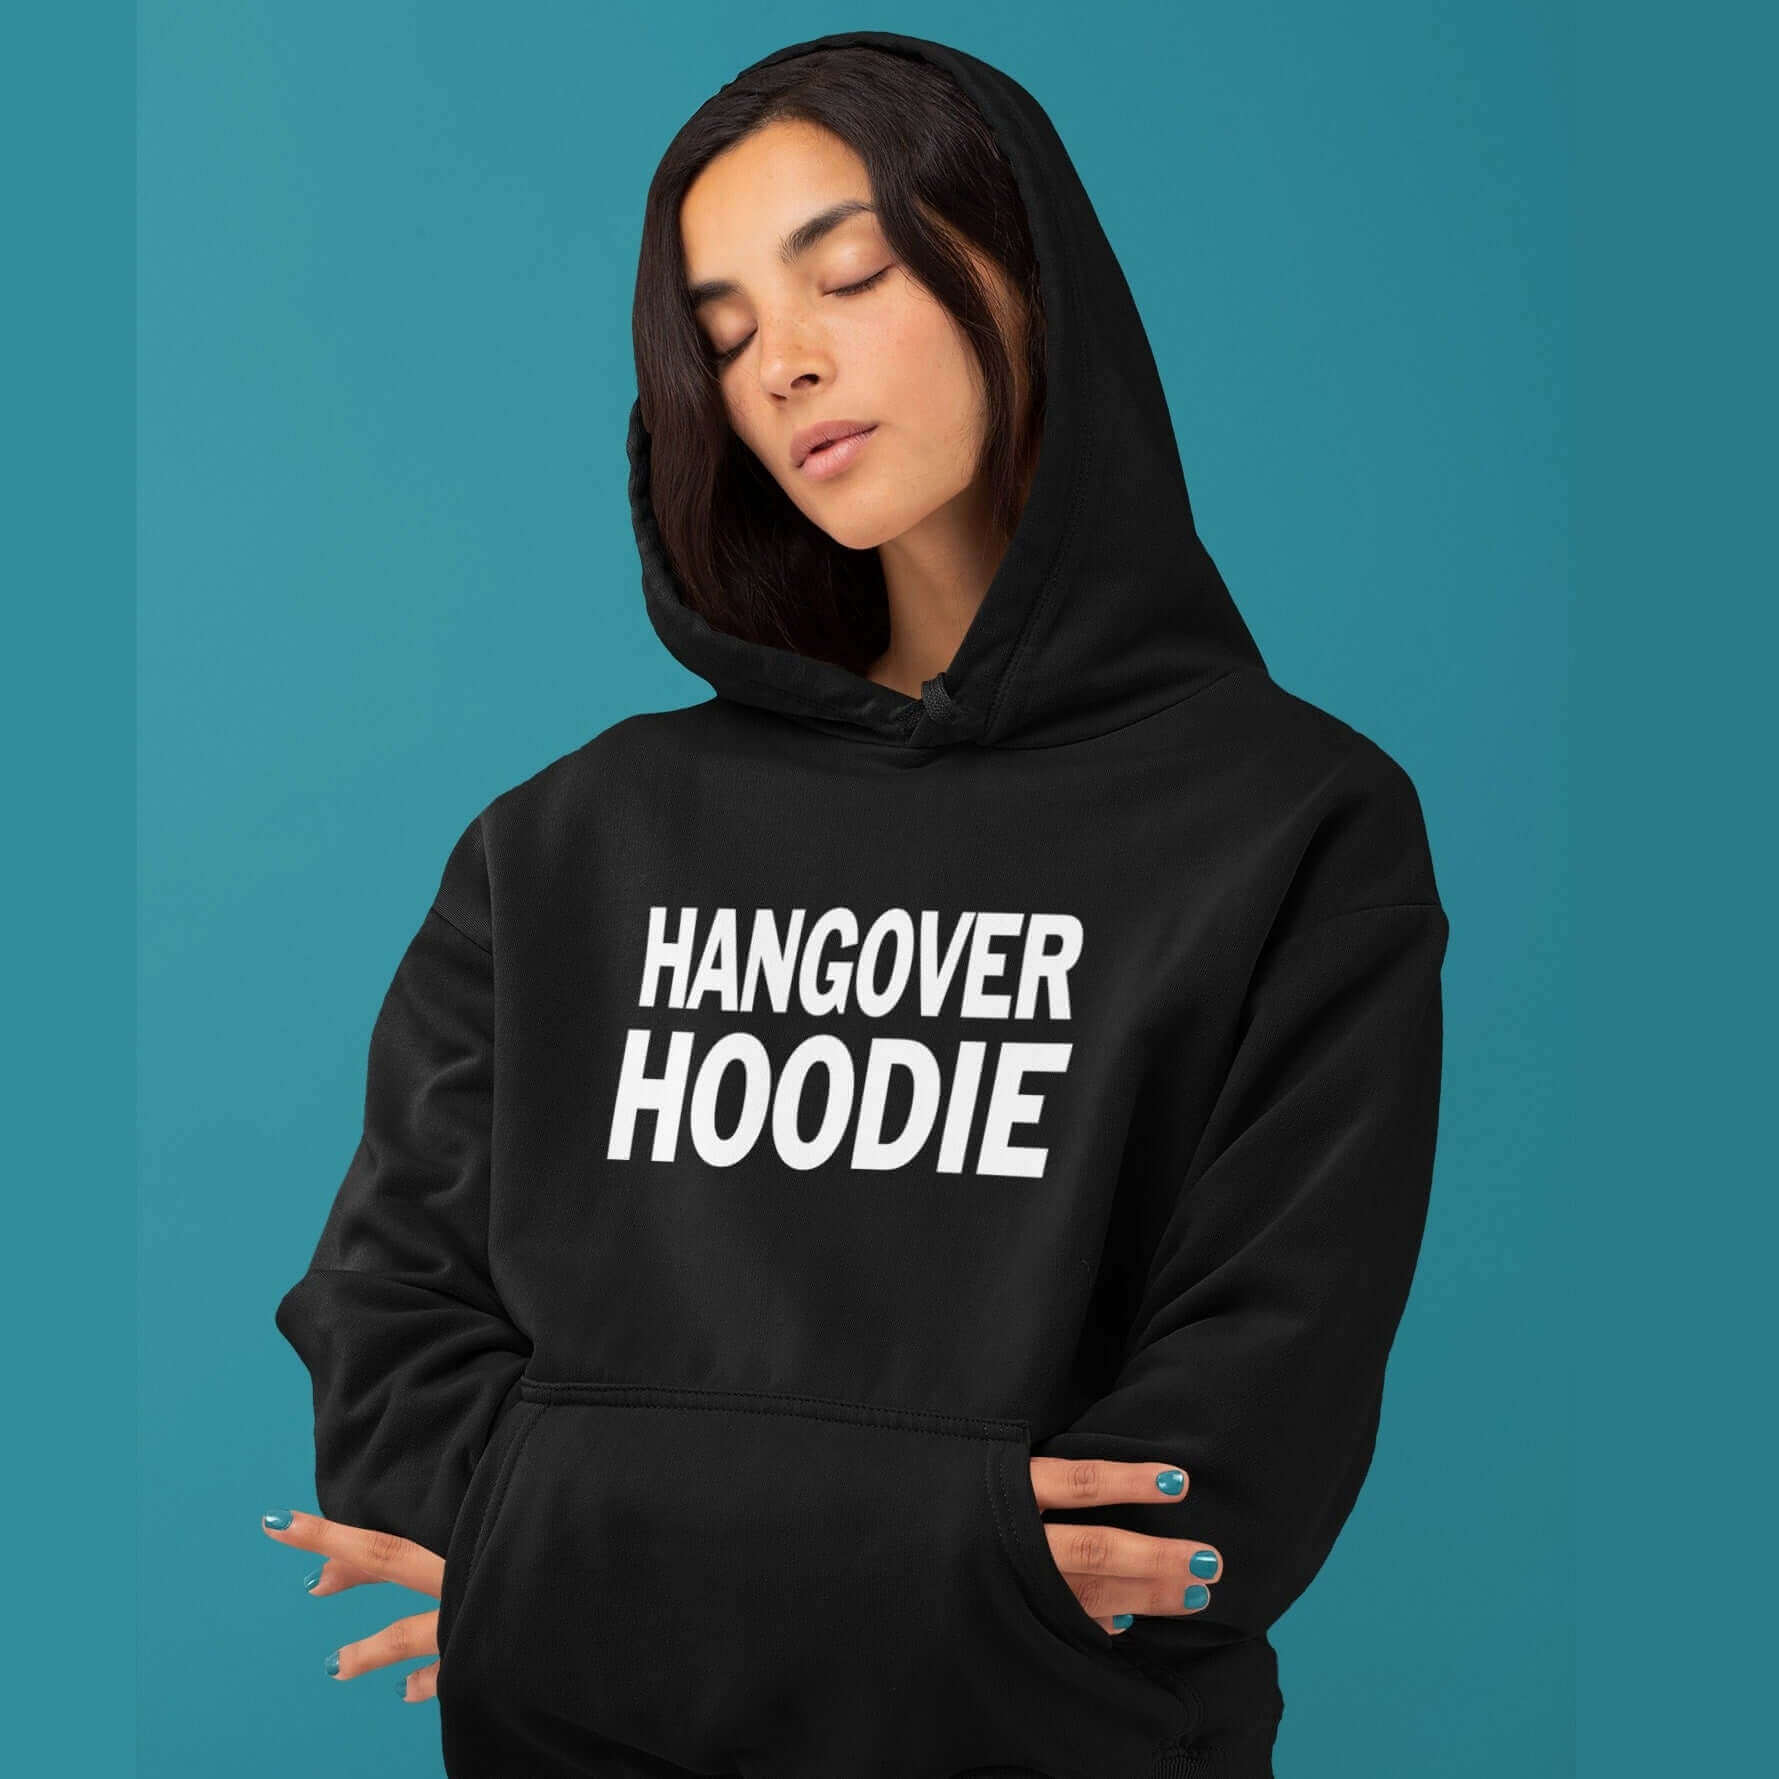 Woman wearing a black hoodie sweatshirt with the words Hangover hoodie printed on the front.